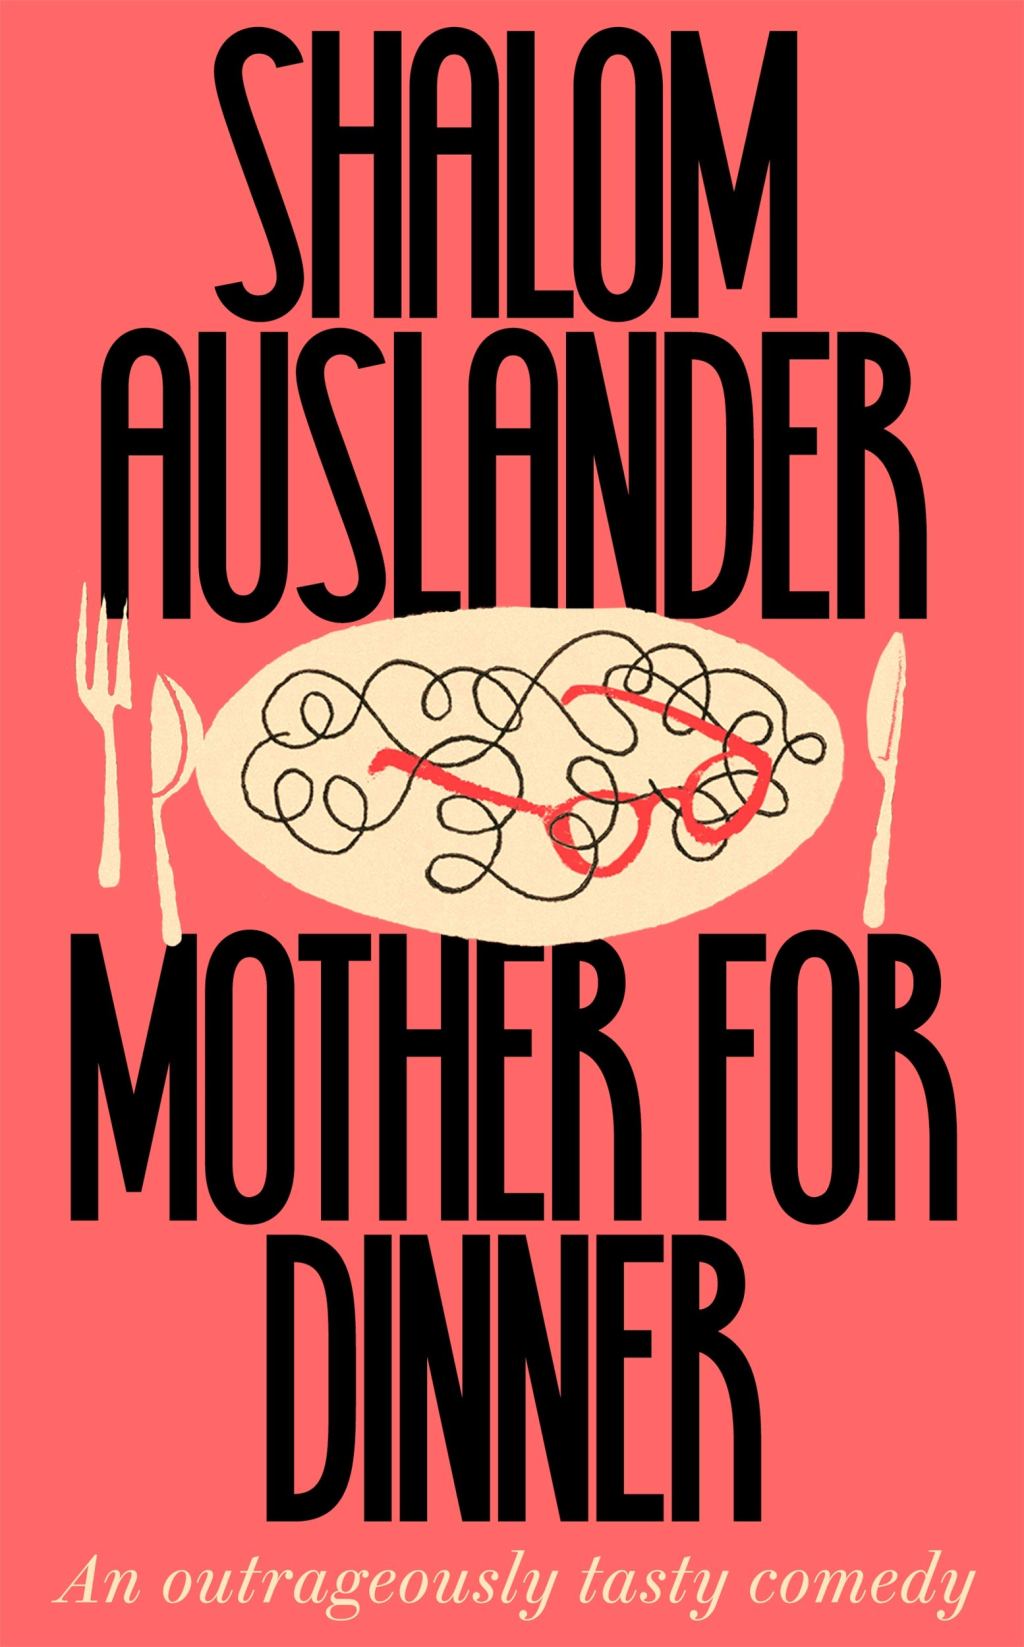 Mother for Dinner by Shalom Auslander is out now (Picador, £16.99)